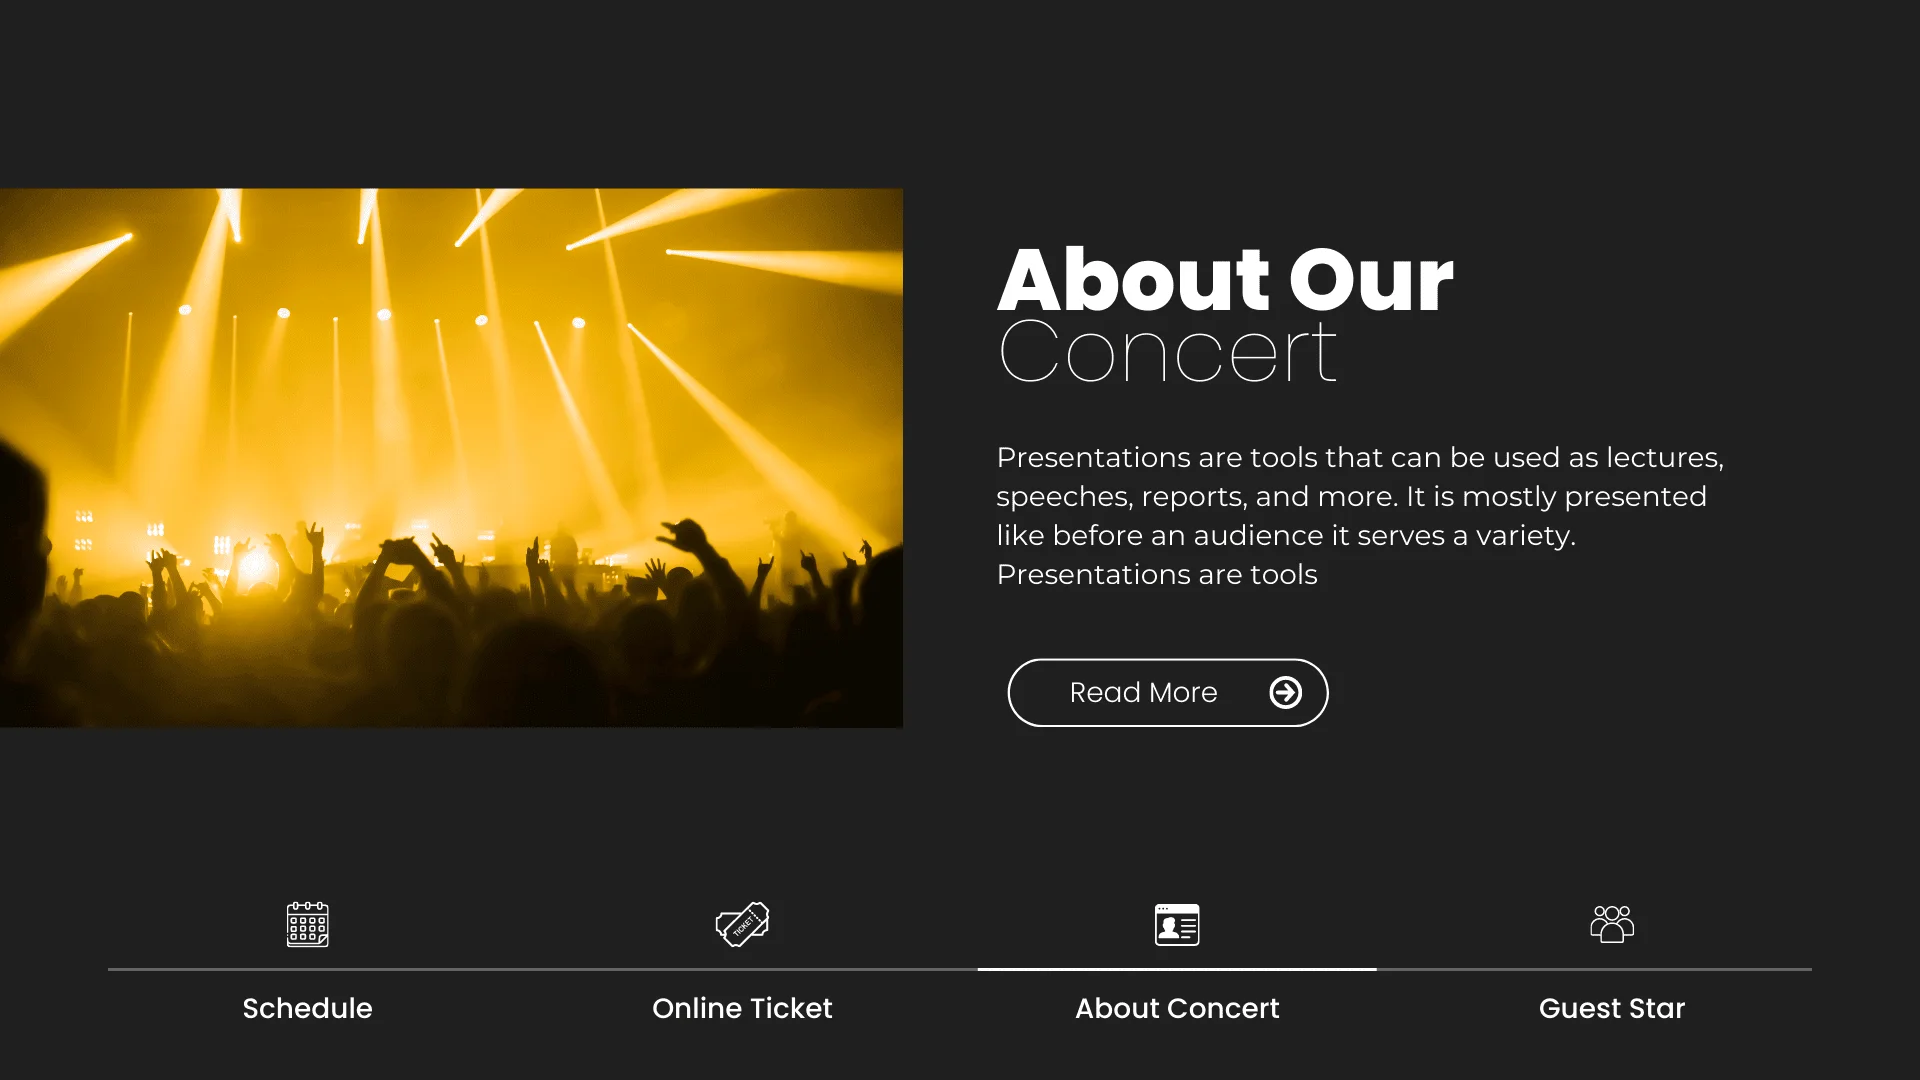 Captivating 'About Our Concert' presentation templates with square-shaped concert images, icons, and engaging content.